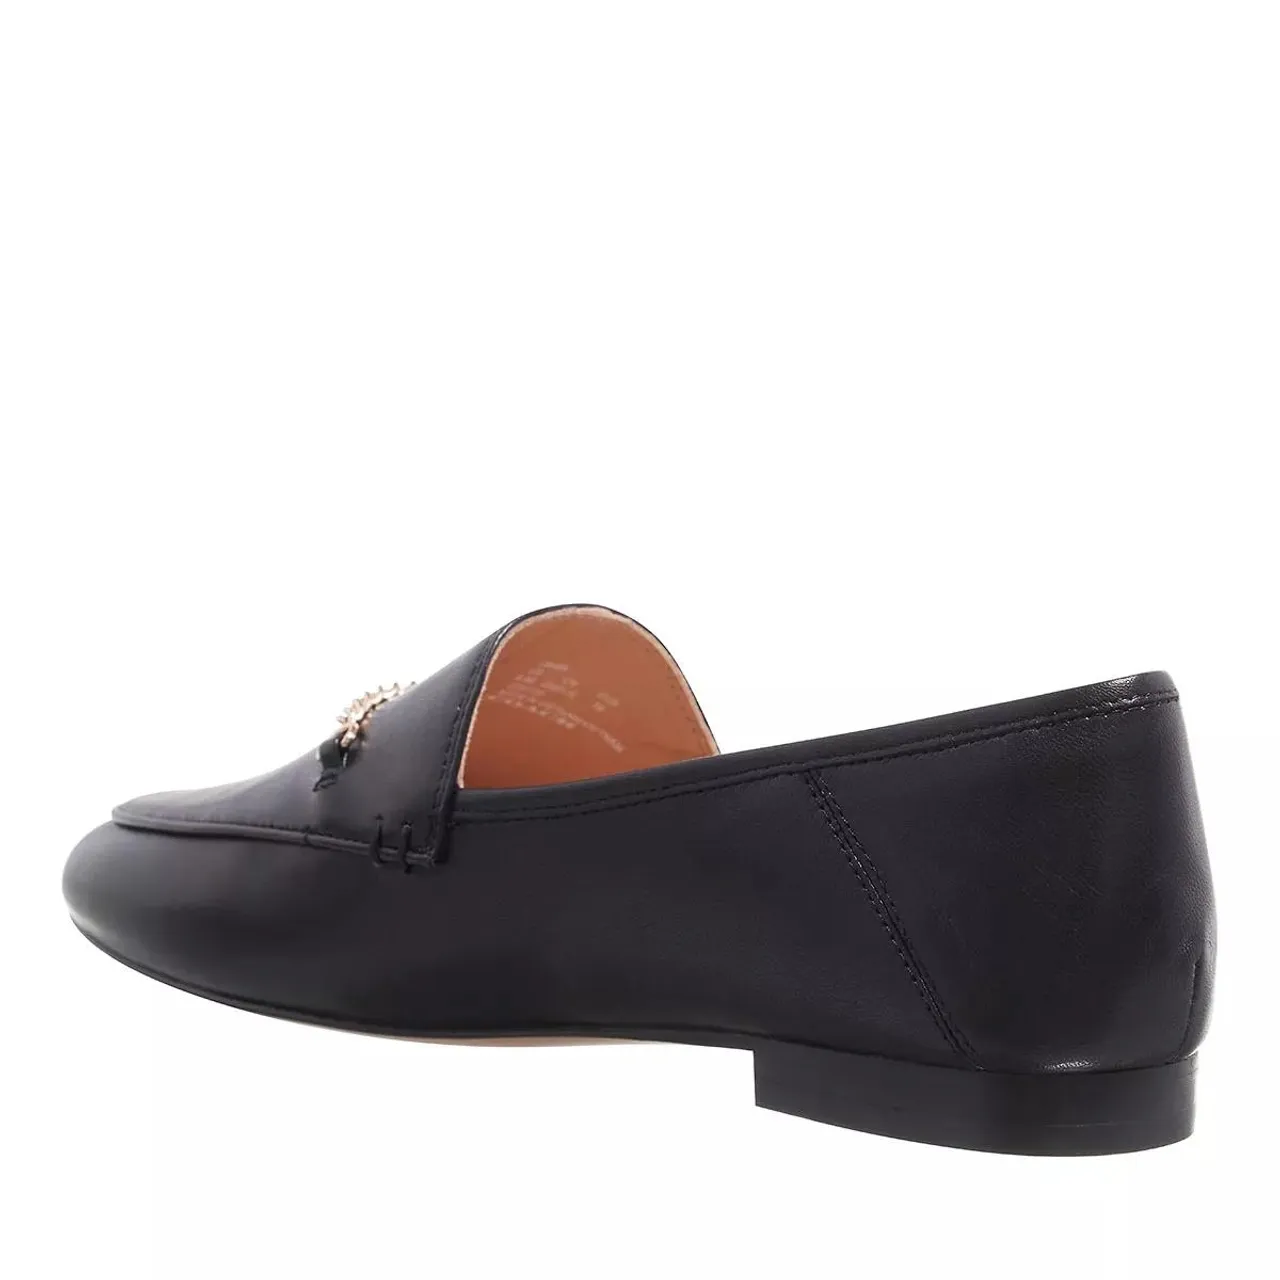 Coach Loafers & Ballet Pumps - Hanna Leather Loafer - black - Loafers & Ballet Pumps for ladies